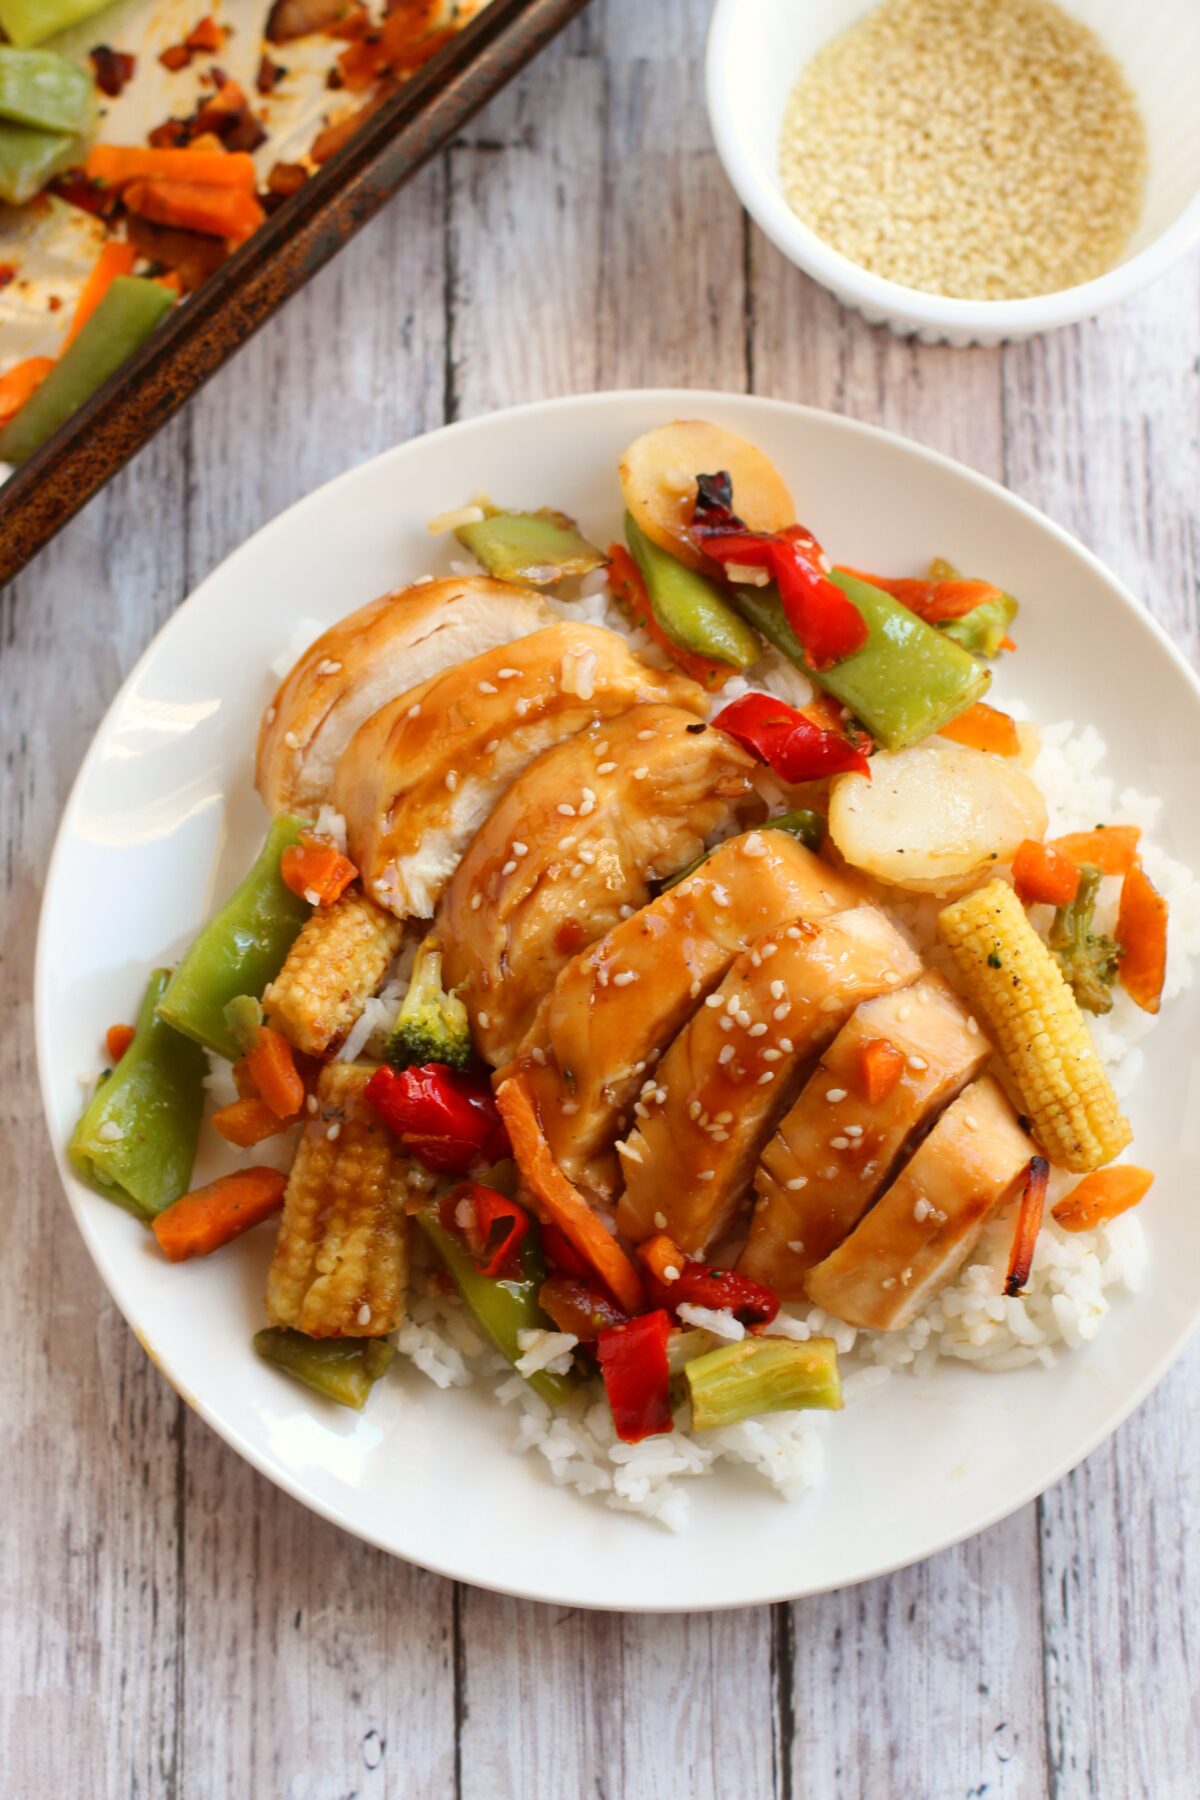 The best baked sheet pan chicken teriyaki recipe for busy weeknights! Full of juicy and tender chicken on a bed of sweet and tangy veggies!